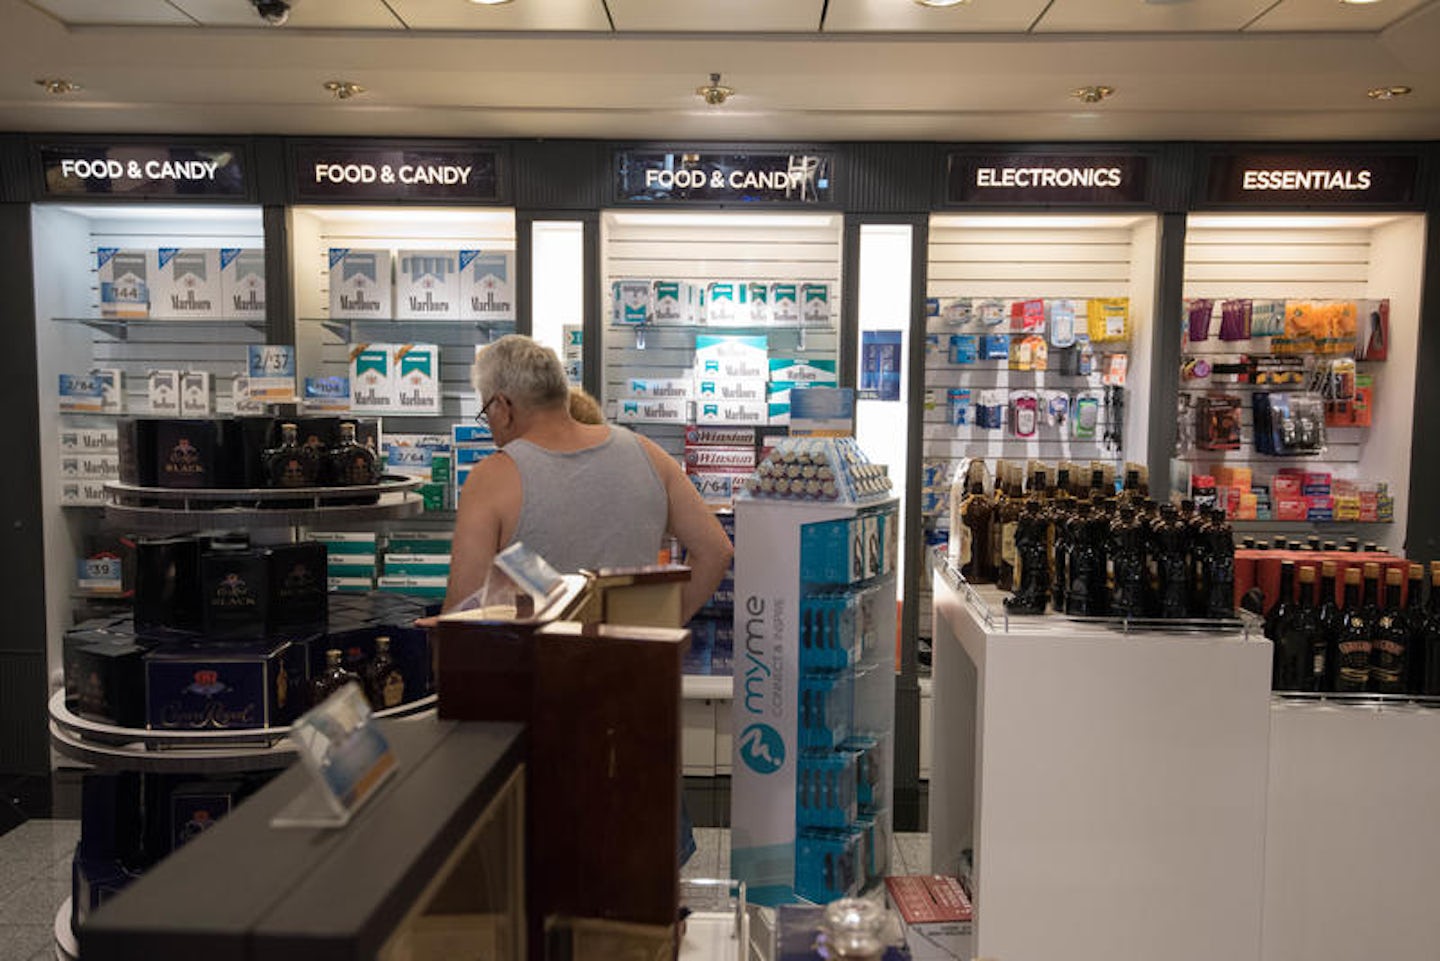 General Store (Promenade Shop) on Freedom of the Seas